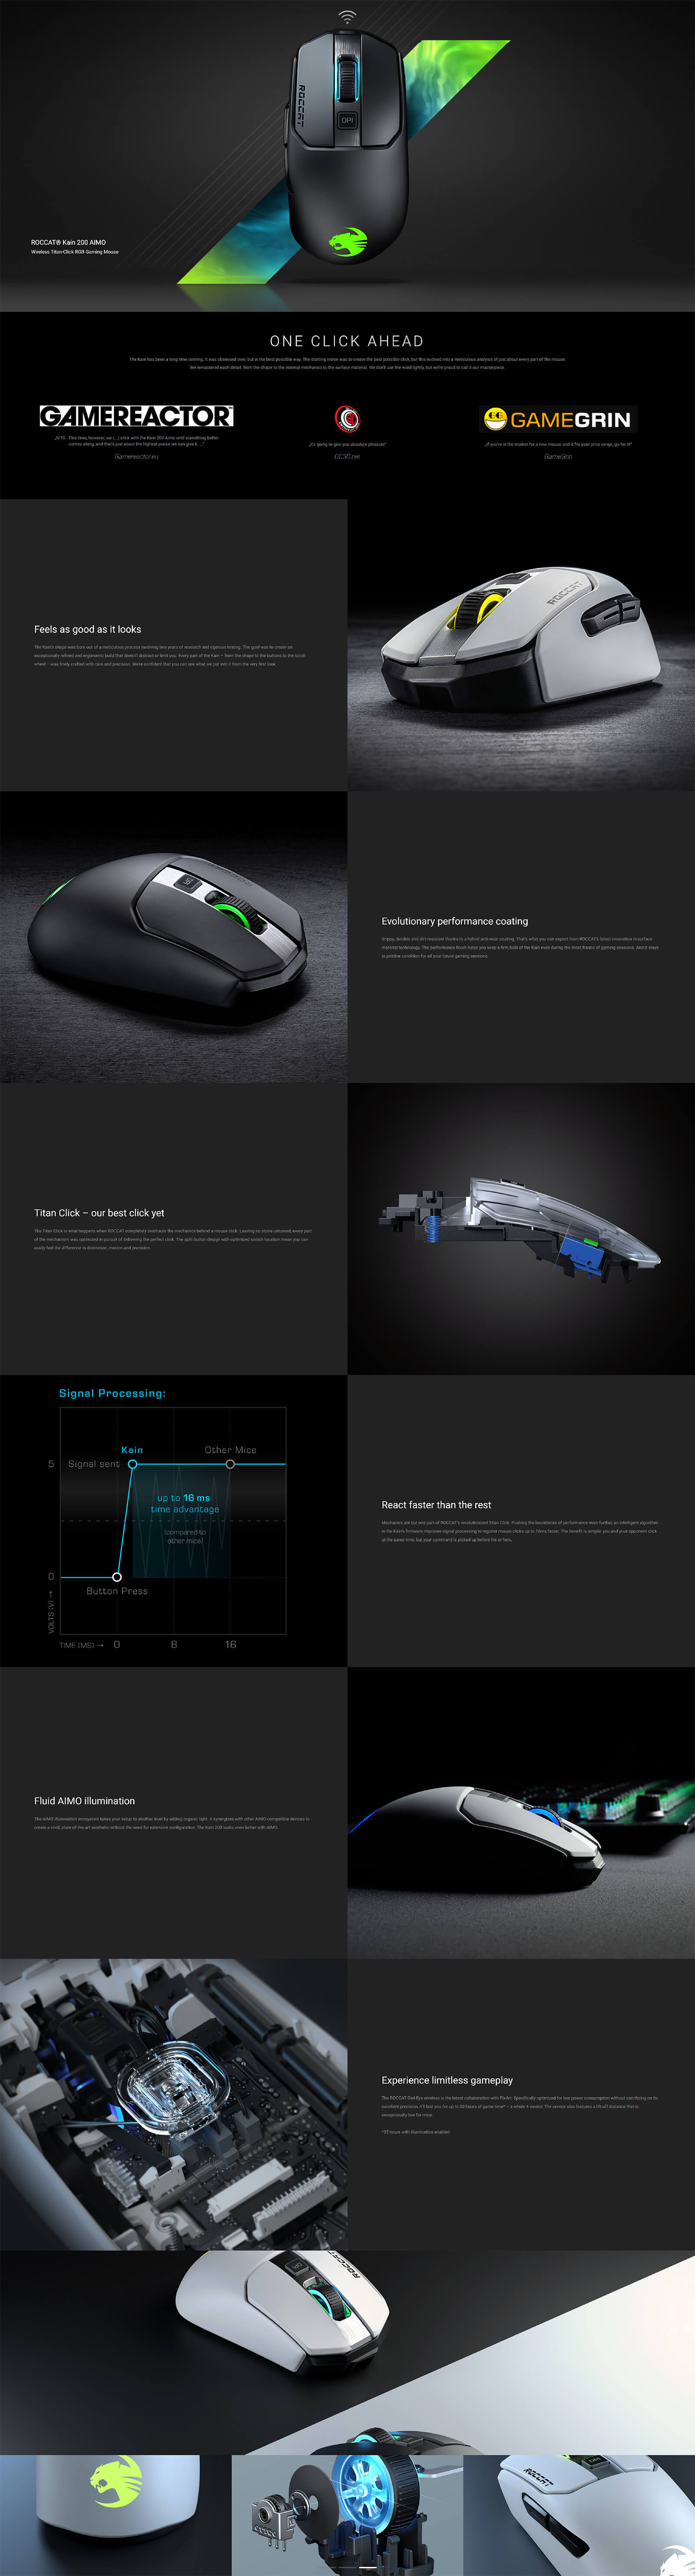 Buy Roccat Kain 2 Aimo Rgb Wireless Mouse